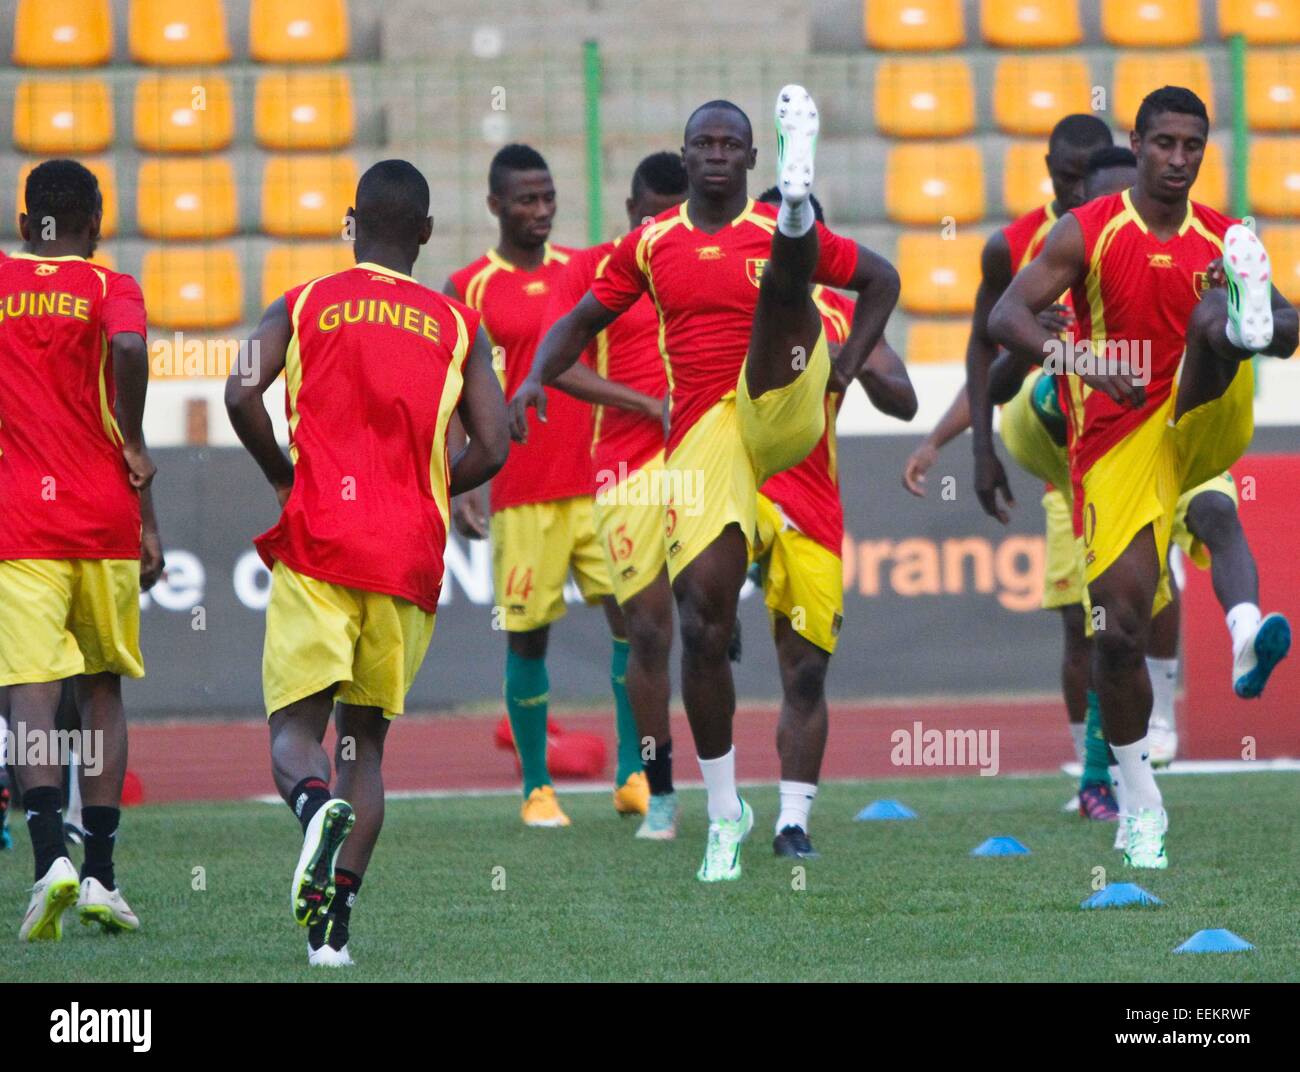 Malabo, Equatorial Guinea. 19th Jan, 2015. Players of the Guinean national football team attend a training session at the Malabo Stadium in Malabo, capital of Equatorial Guinea, Jan. 19, 2015. Guinea will play with Cote d'Ivoire on Jan. 20 in its first group match of the 2015 African Cup finals. © Li Jing/Xinhua/Alamy Live News Stock Photo